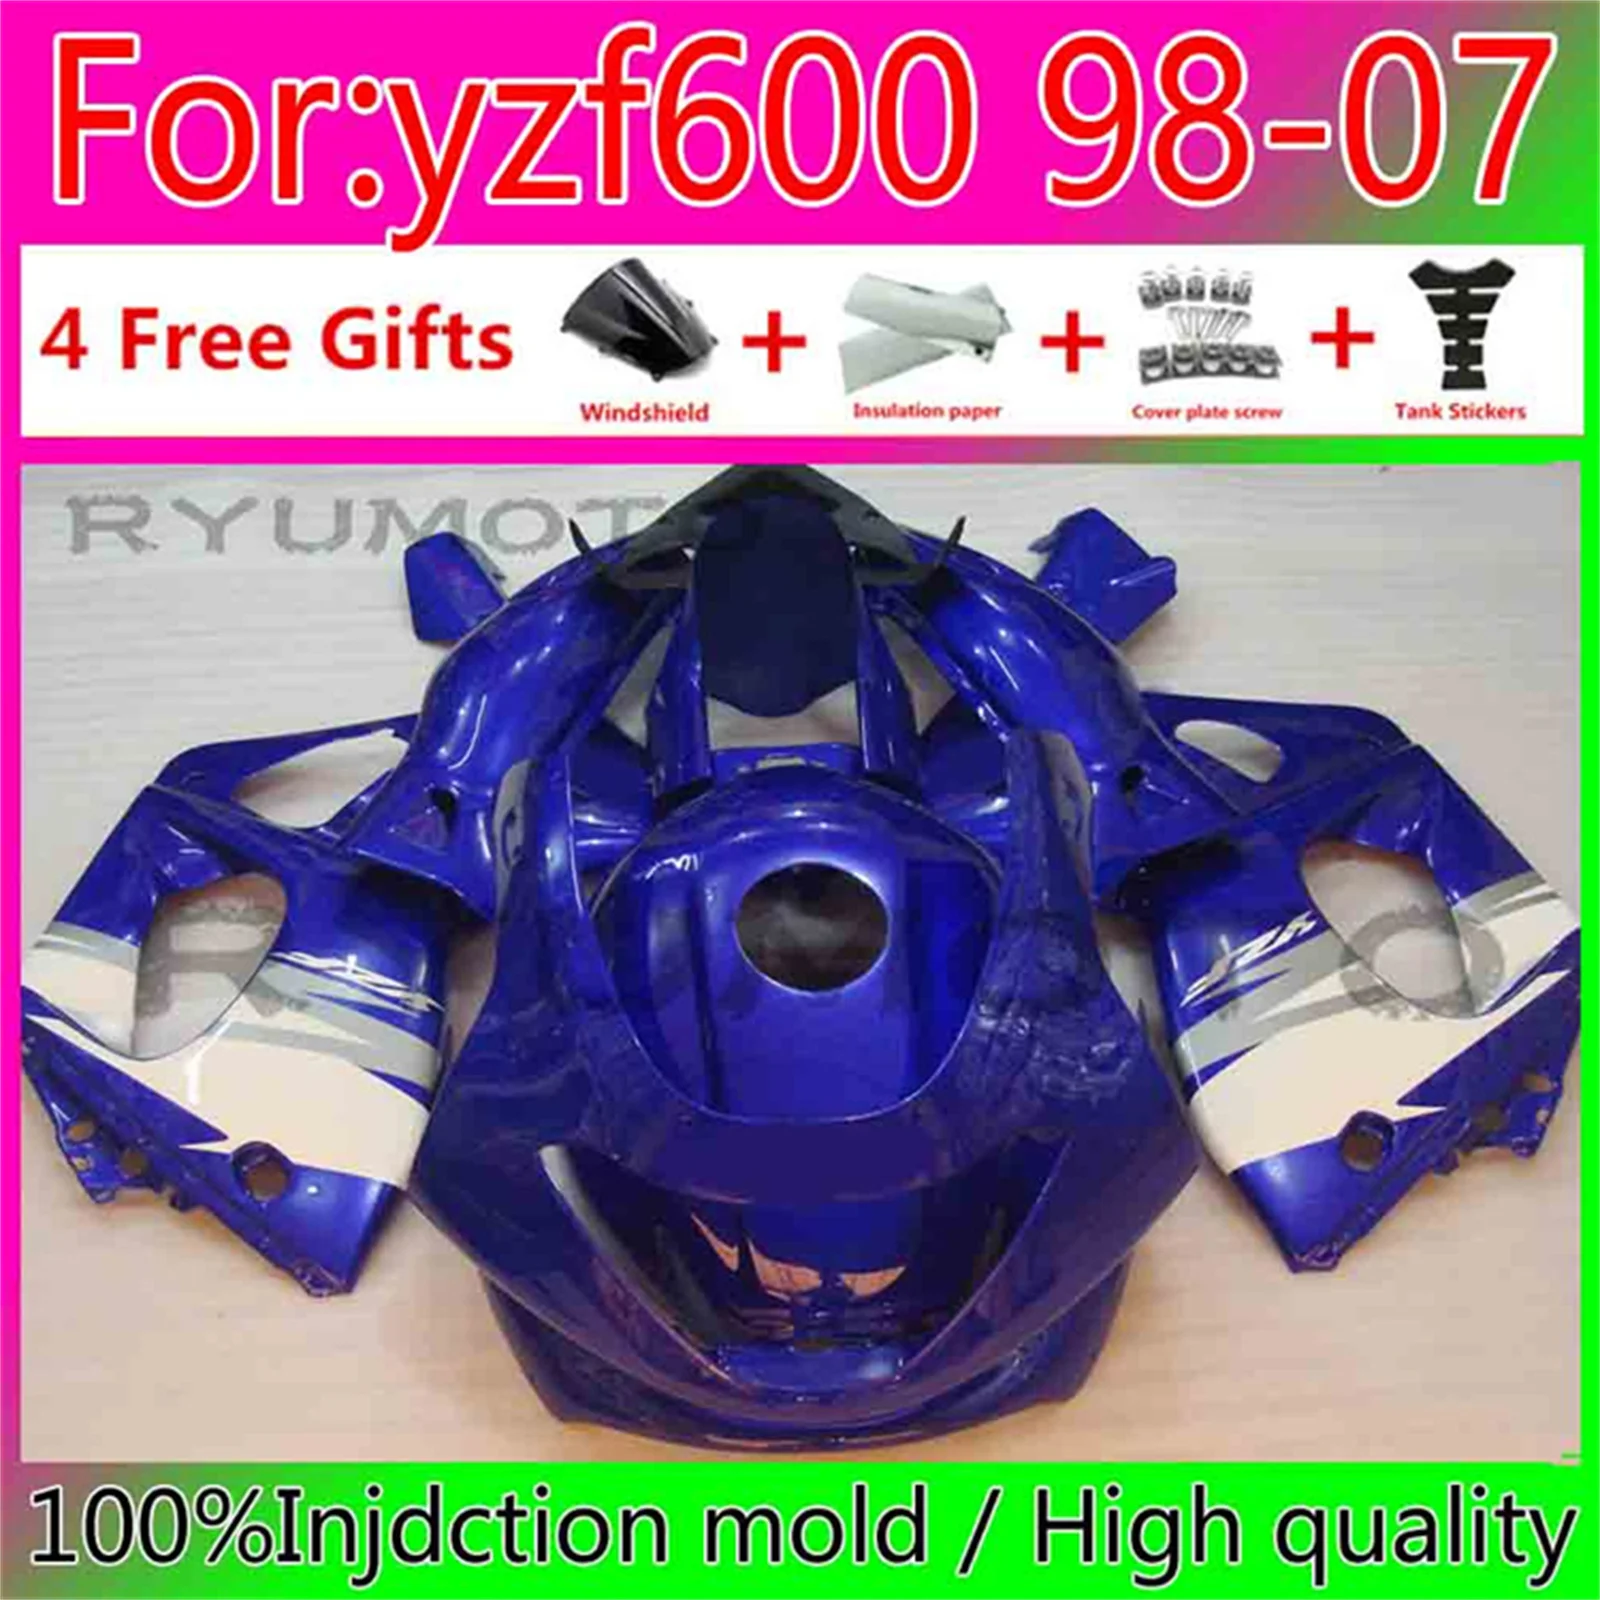 

Motorcycle Injection ABS Kit Fairings For Yamaha YZF 600 1997-2007 YZF600 97 98 99 00 01 02 03 04 05 06 07 bule